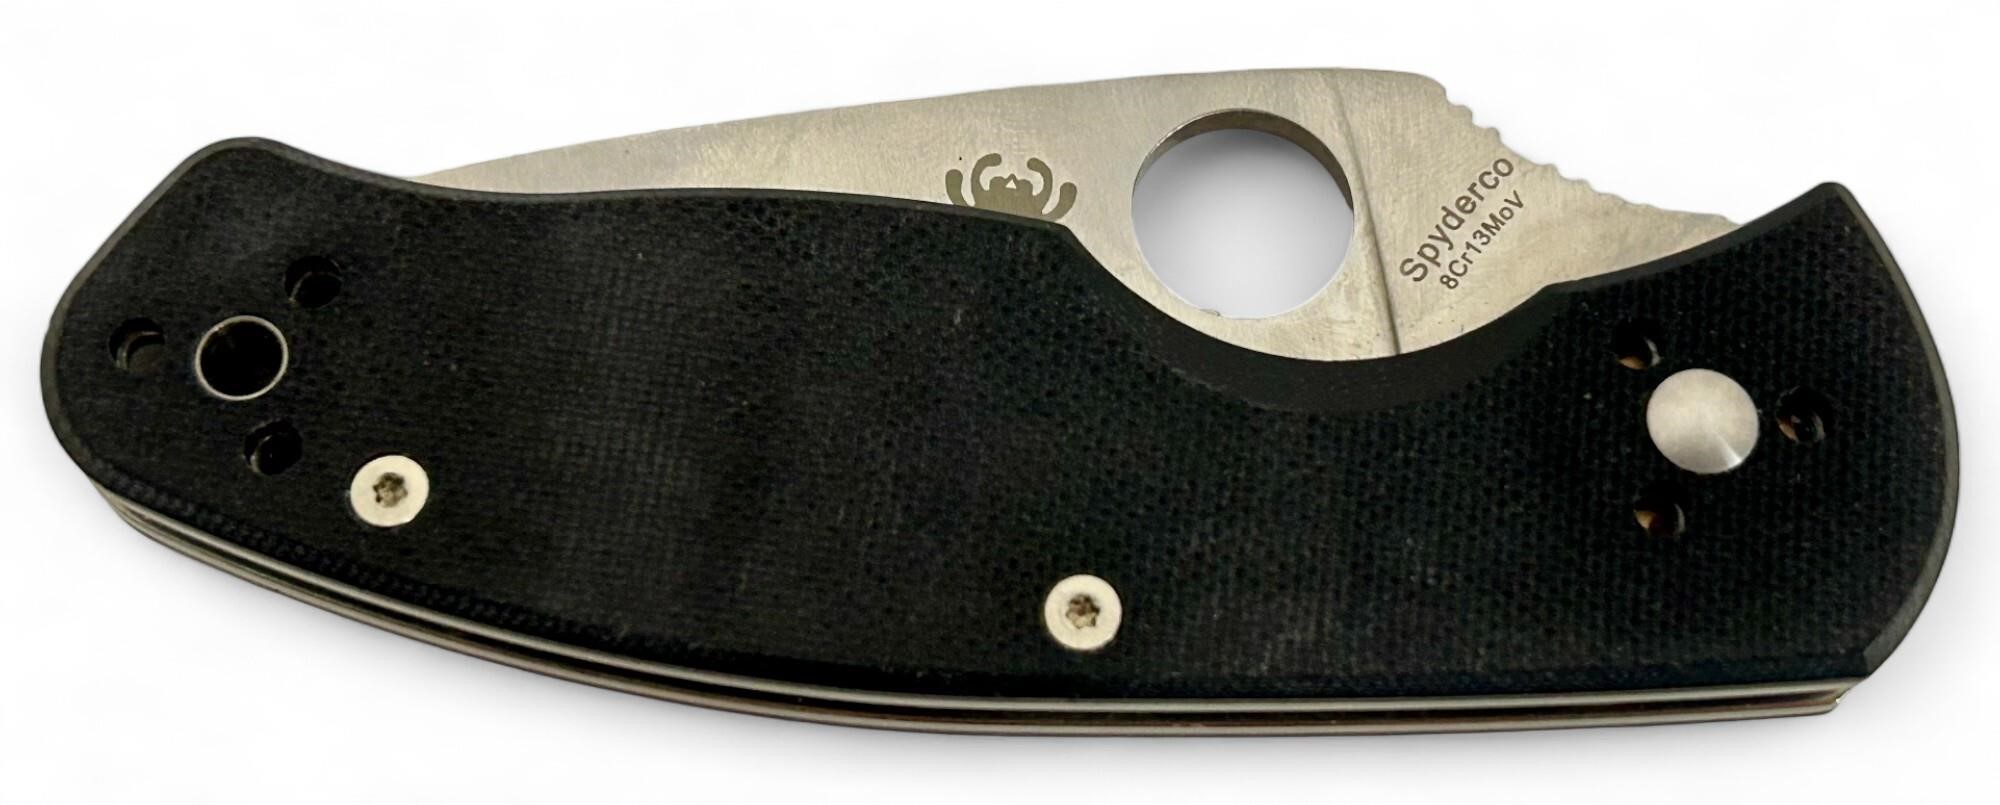 SPYDERCO AMBITIOUS KNIFE